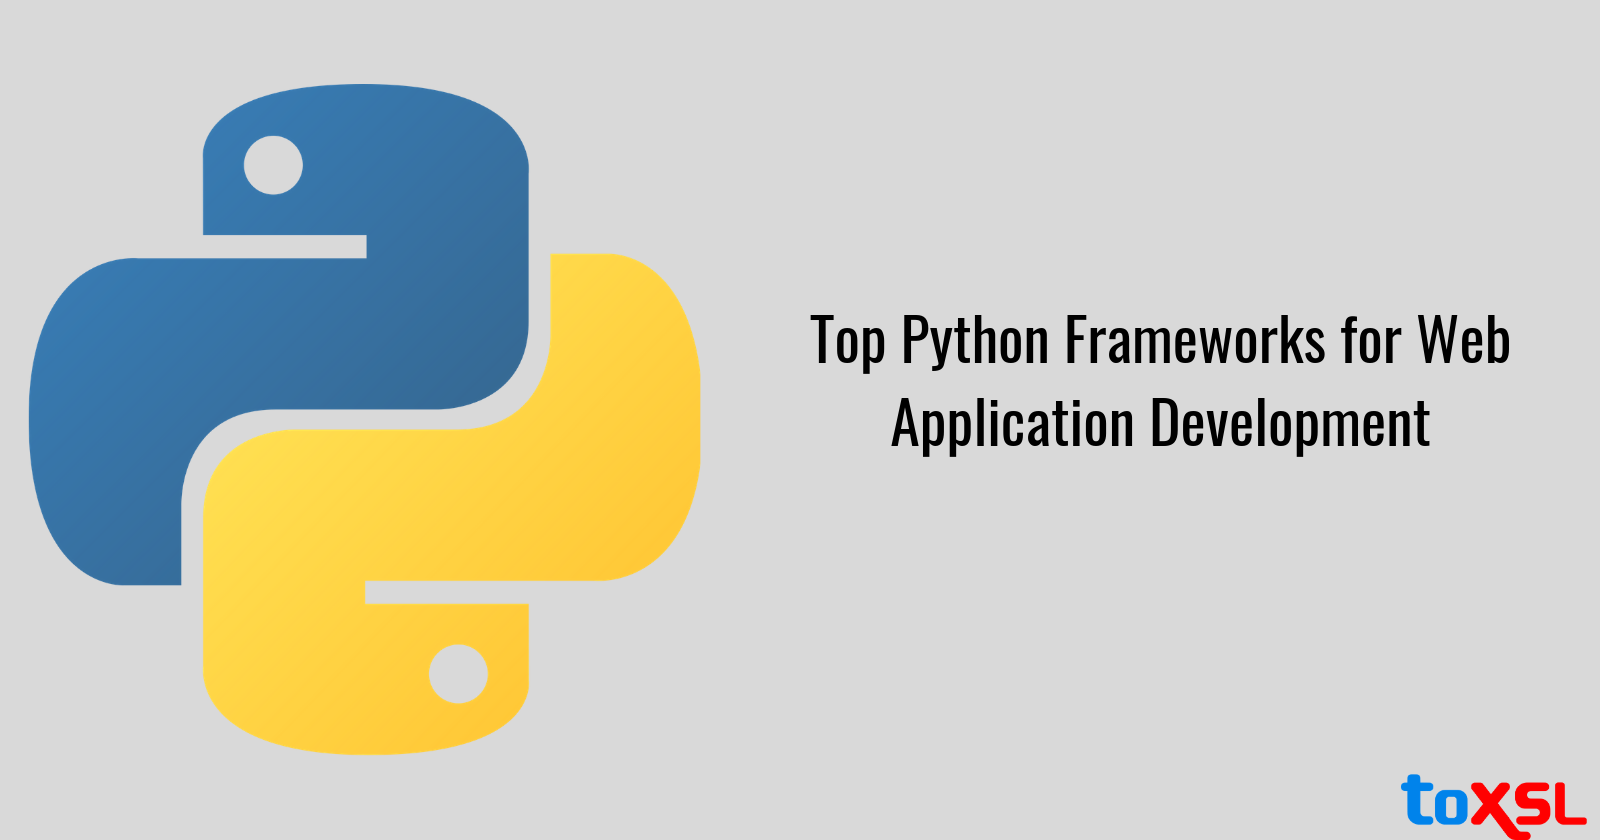 Top Python Frameworks To Study In 2019